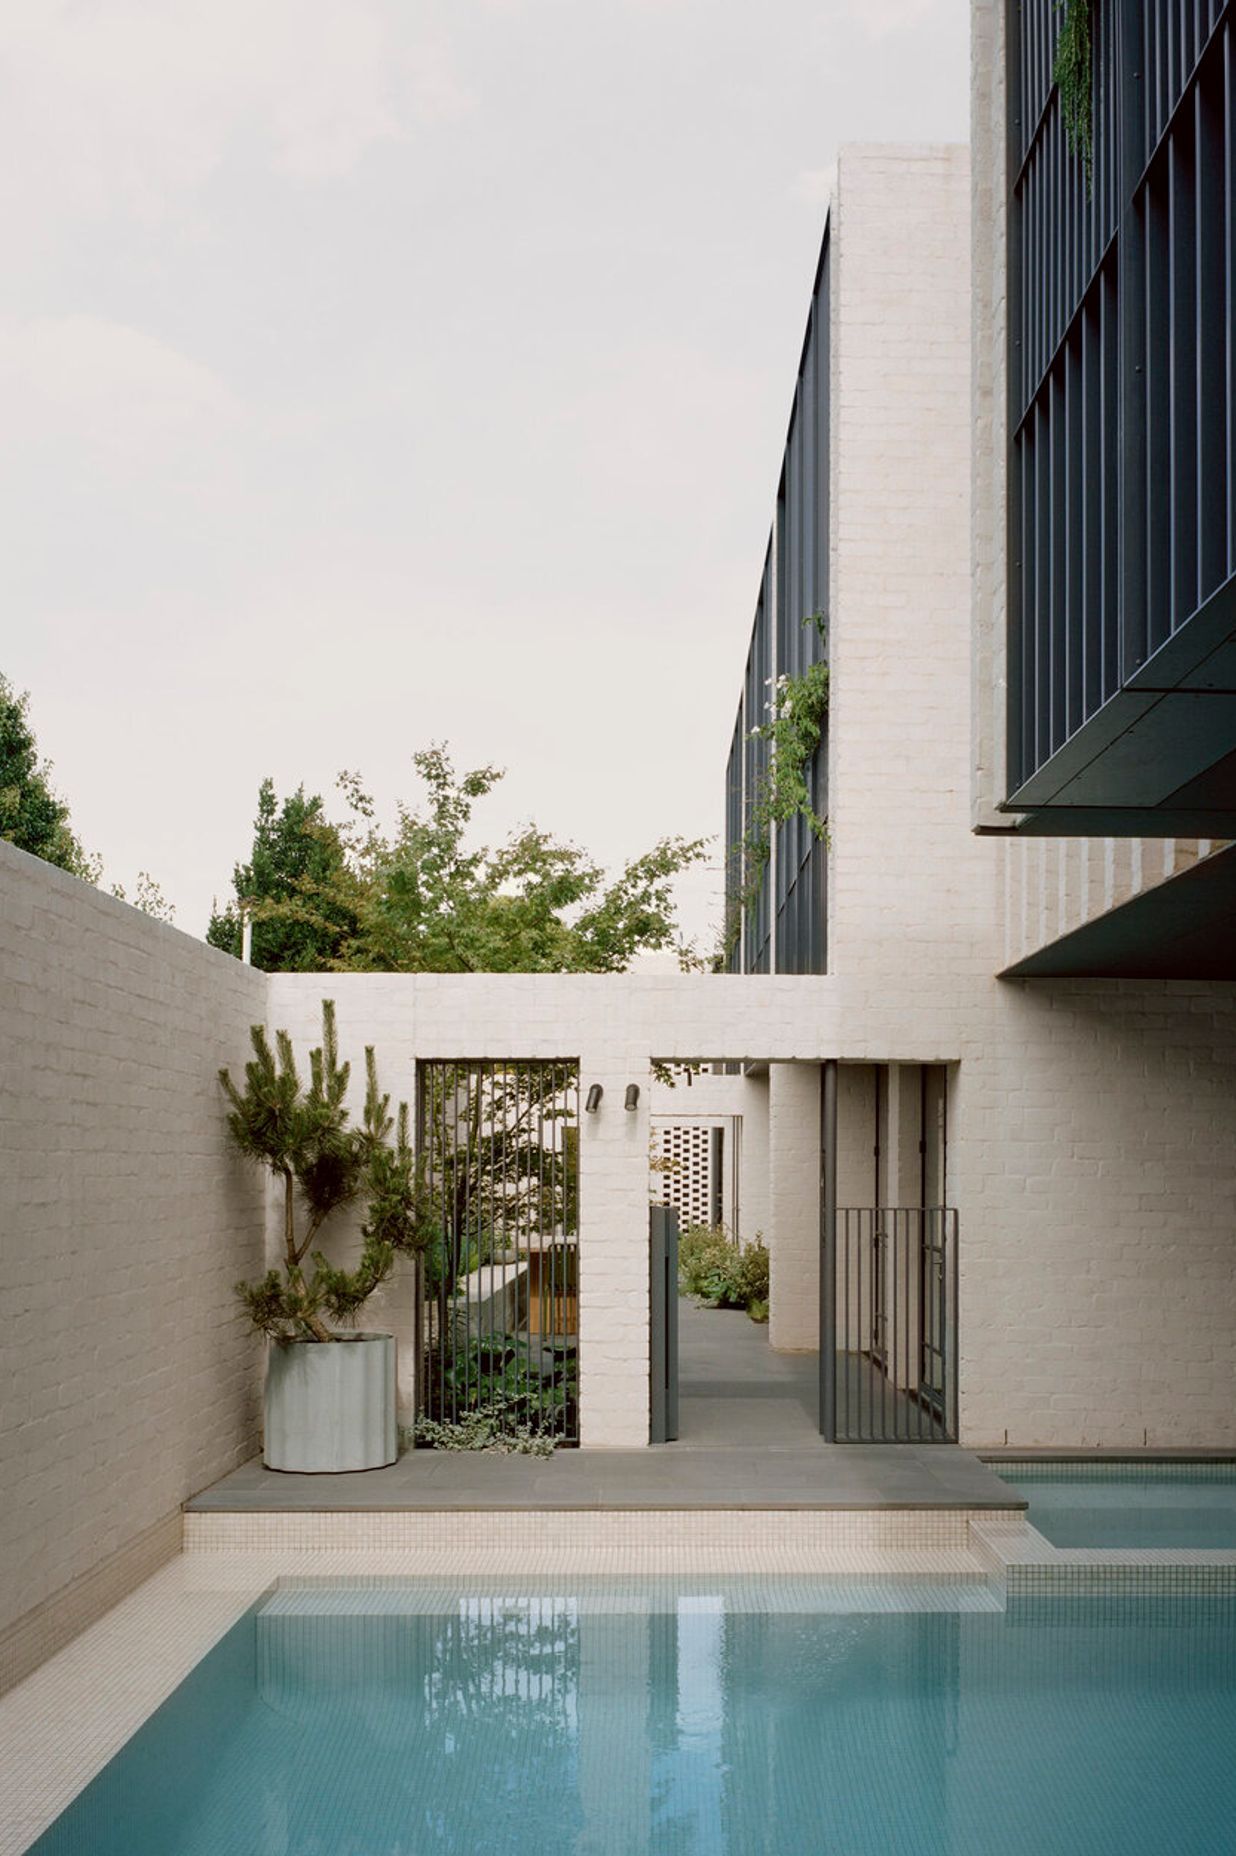 8 Yard House by Peachy Green | Photography by Rory Gardiner